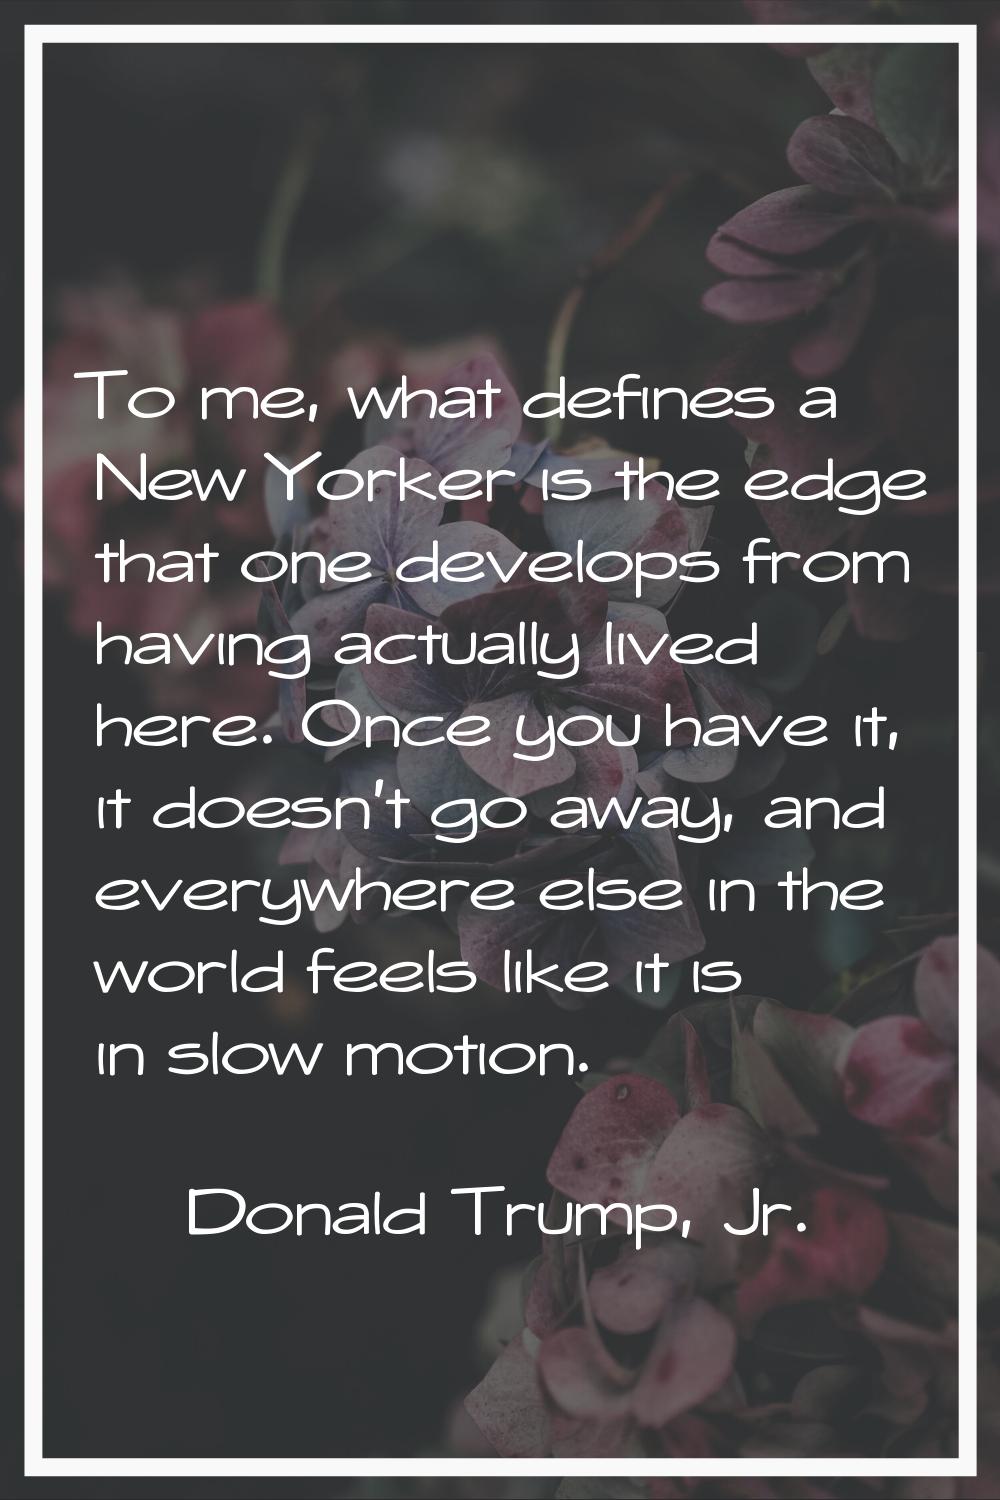 To me, what defines a New Yorker is the edge that one develops from having actually lived here. Onc